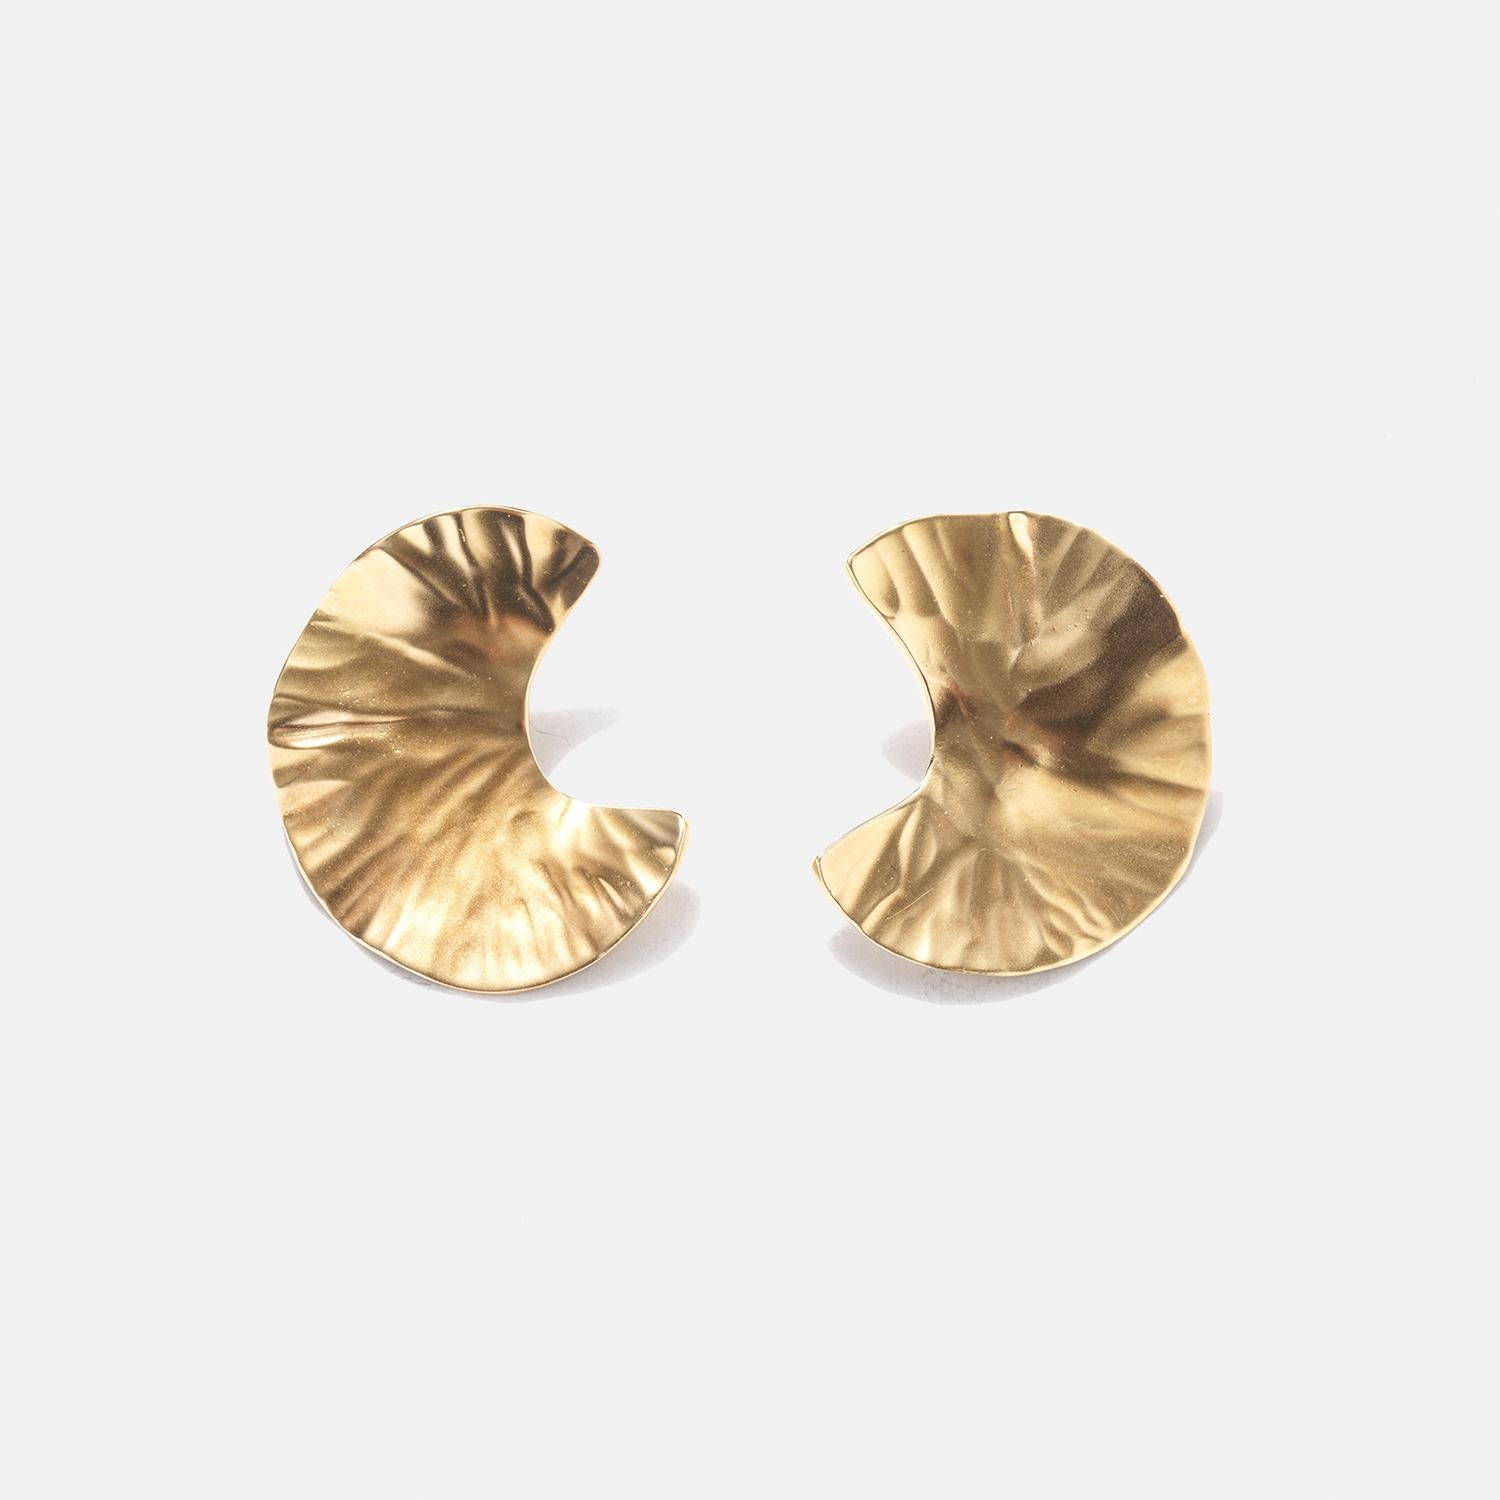 These 18 karat earrings have a unique, curved shape that resembles wavy leaves or small fans. The surface is textured with soft, rippled patterns that catch the light, giving them a vibrant, shimmering appearance. They are clip-on earrings, which